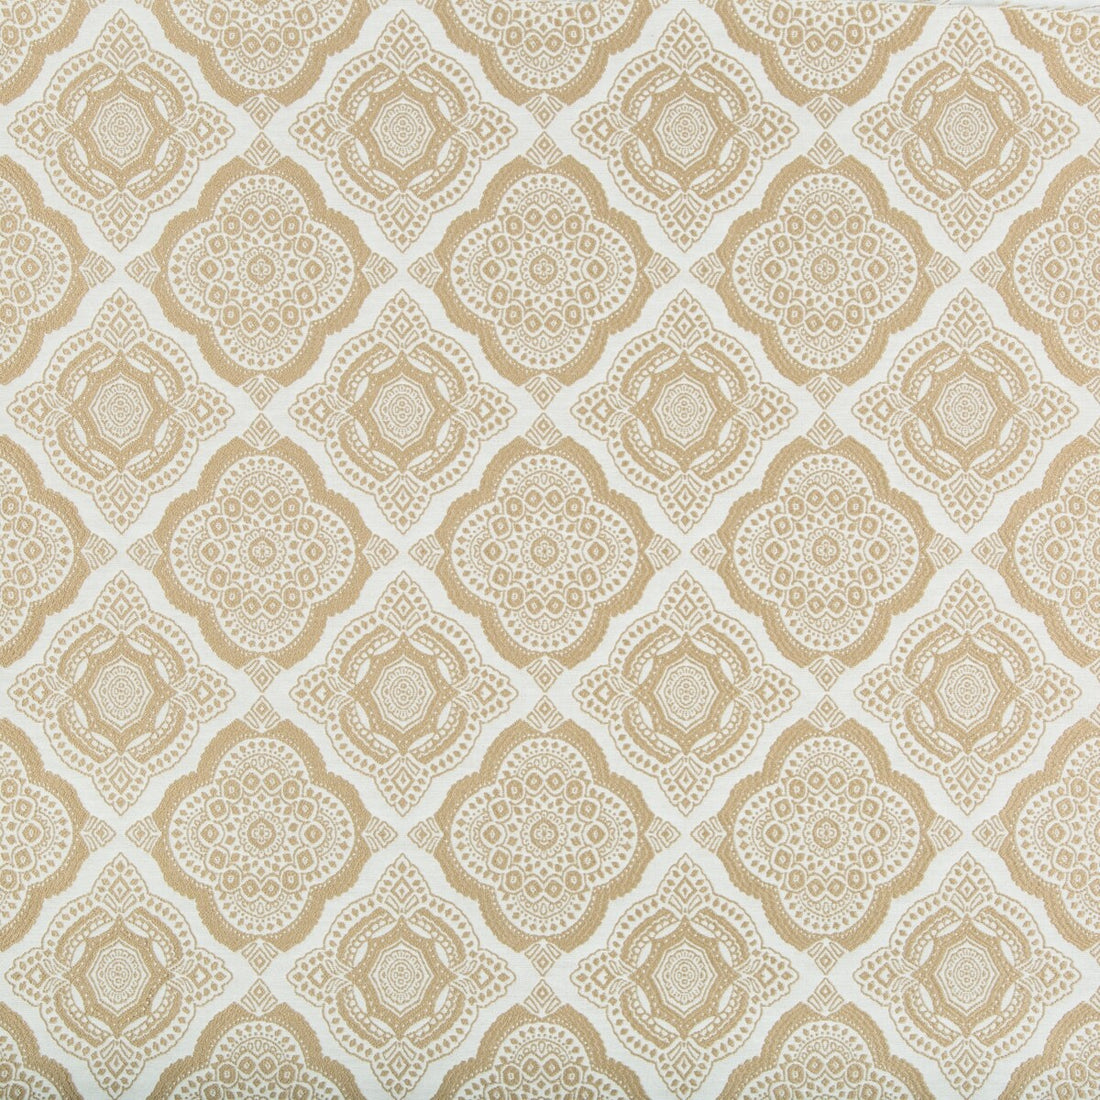 Kravet Design fabric in 34704-116 color - pattern 34704.116.0 - by Kravet Design in the Performance Crypton Home collection